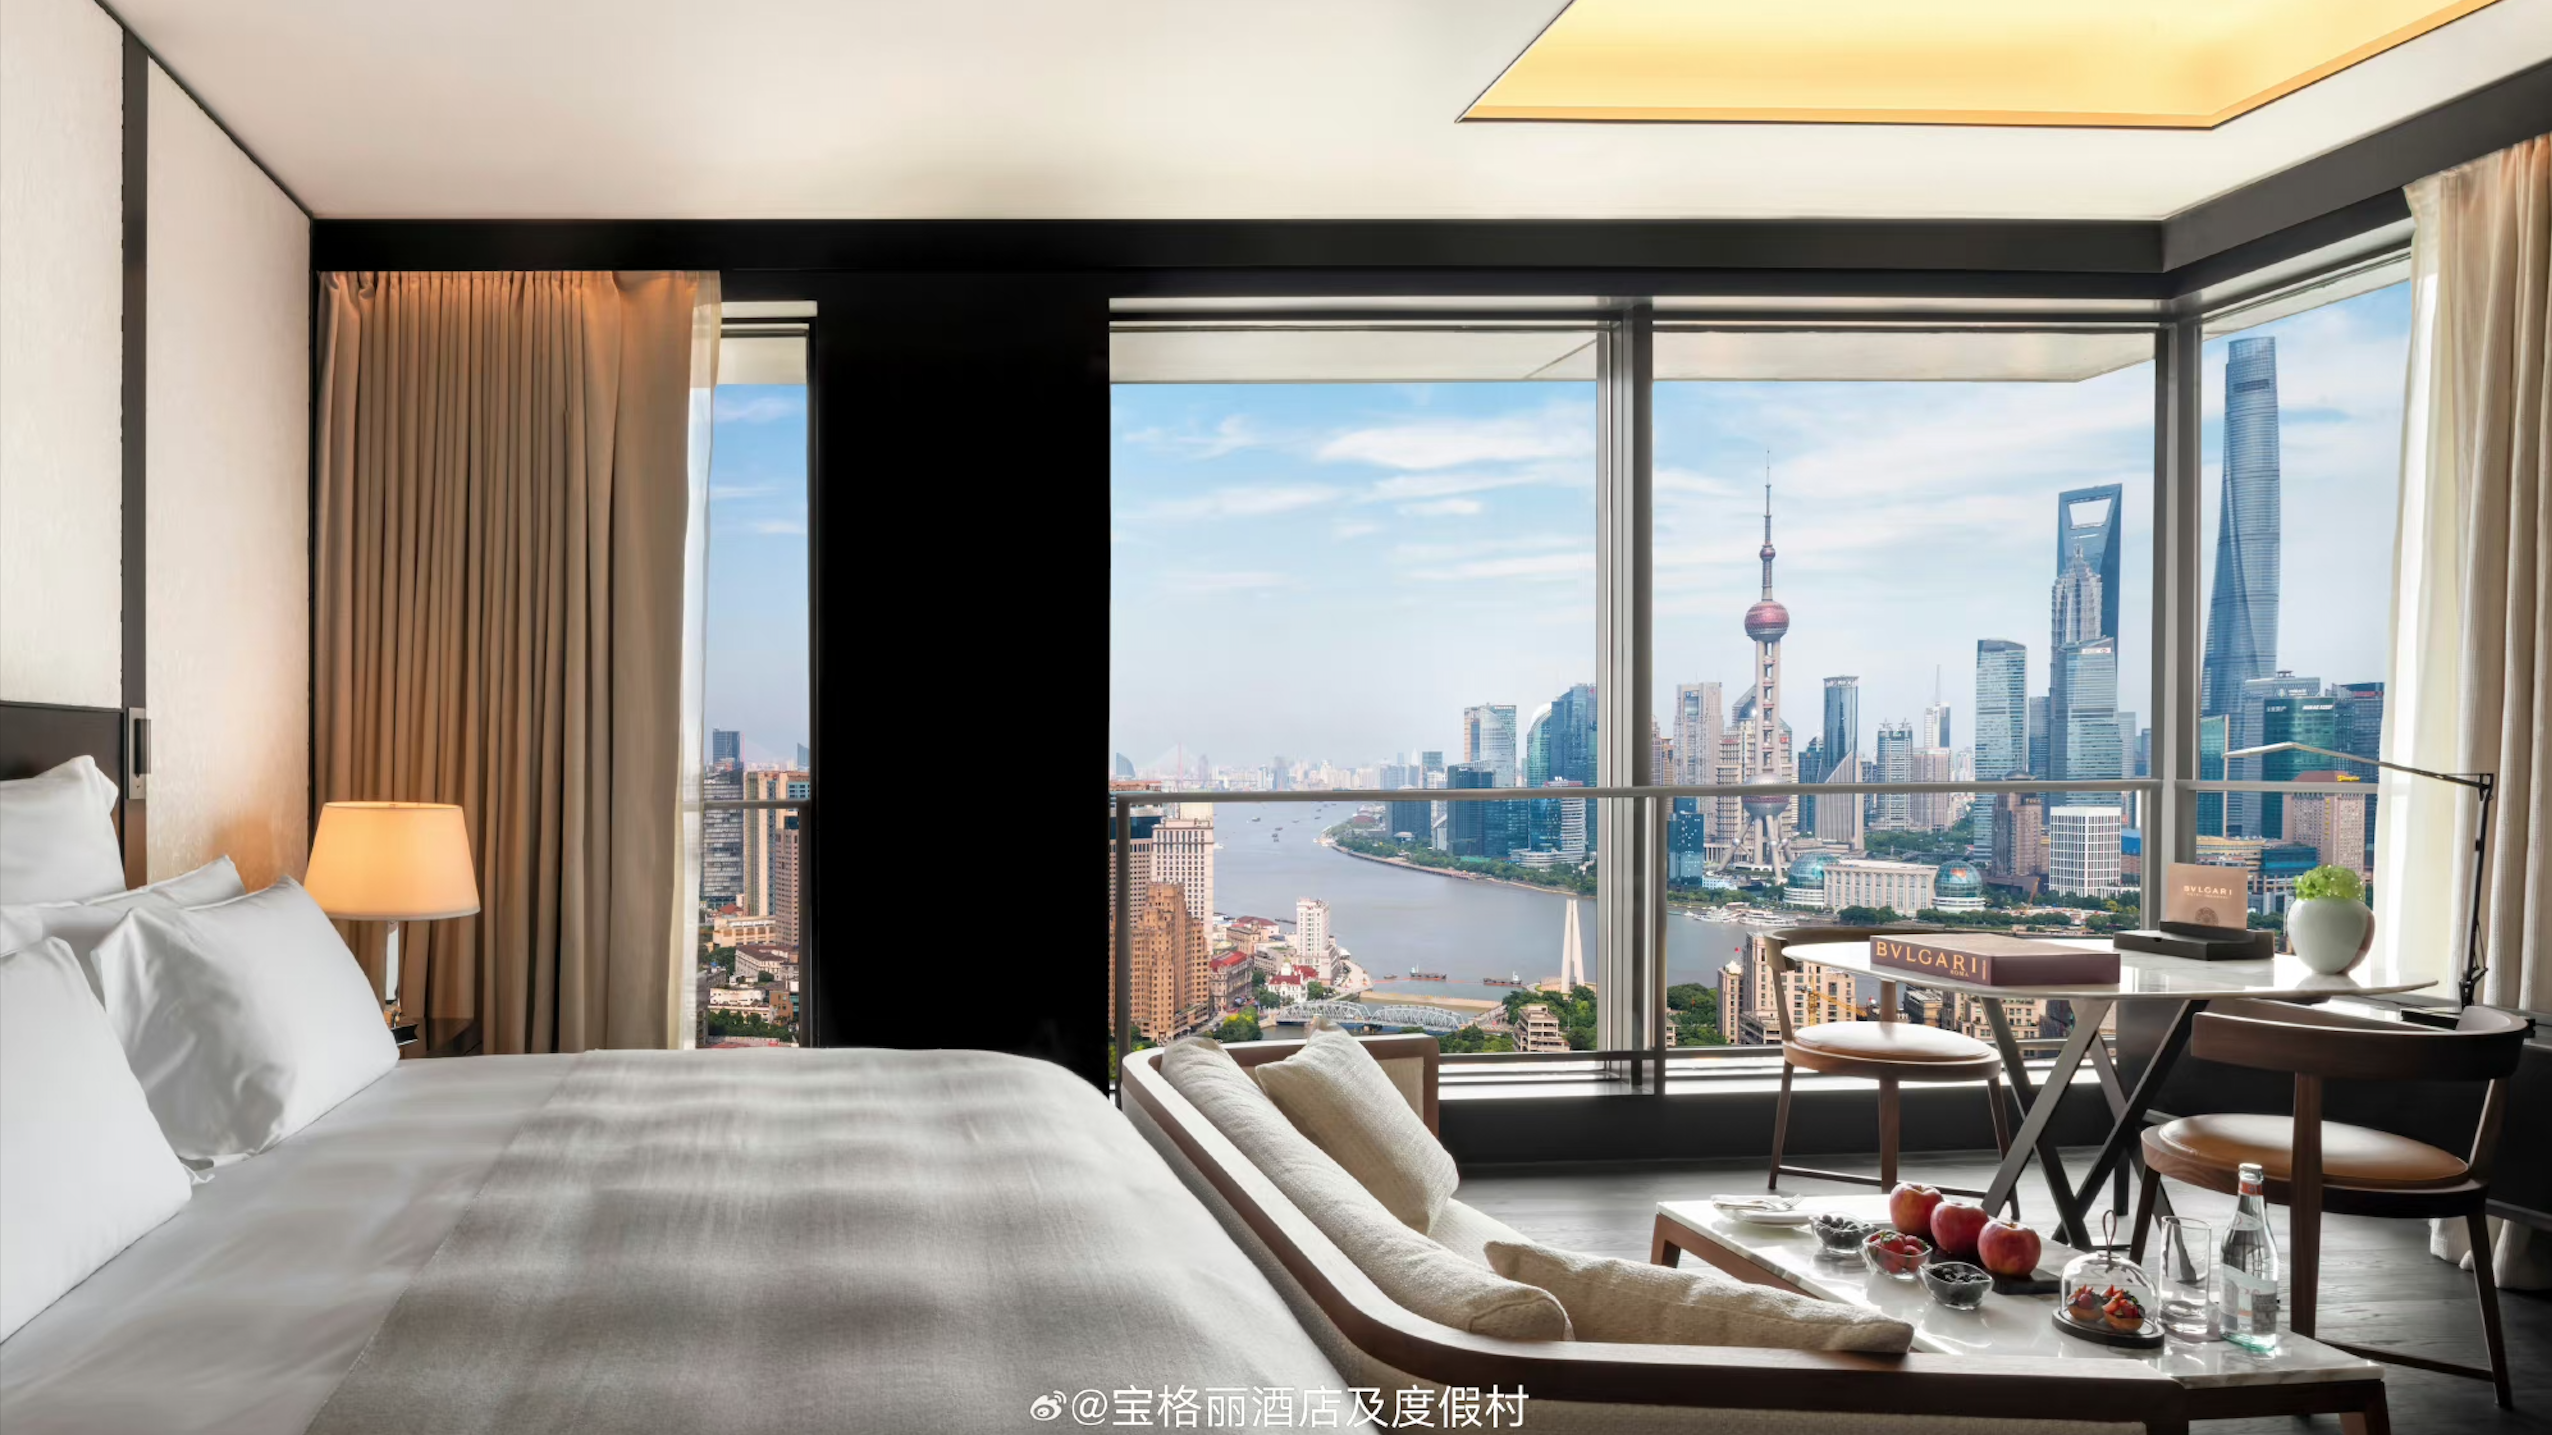 China's homegrown getaway: Unraveling the luxury staycation trend